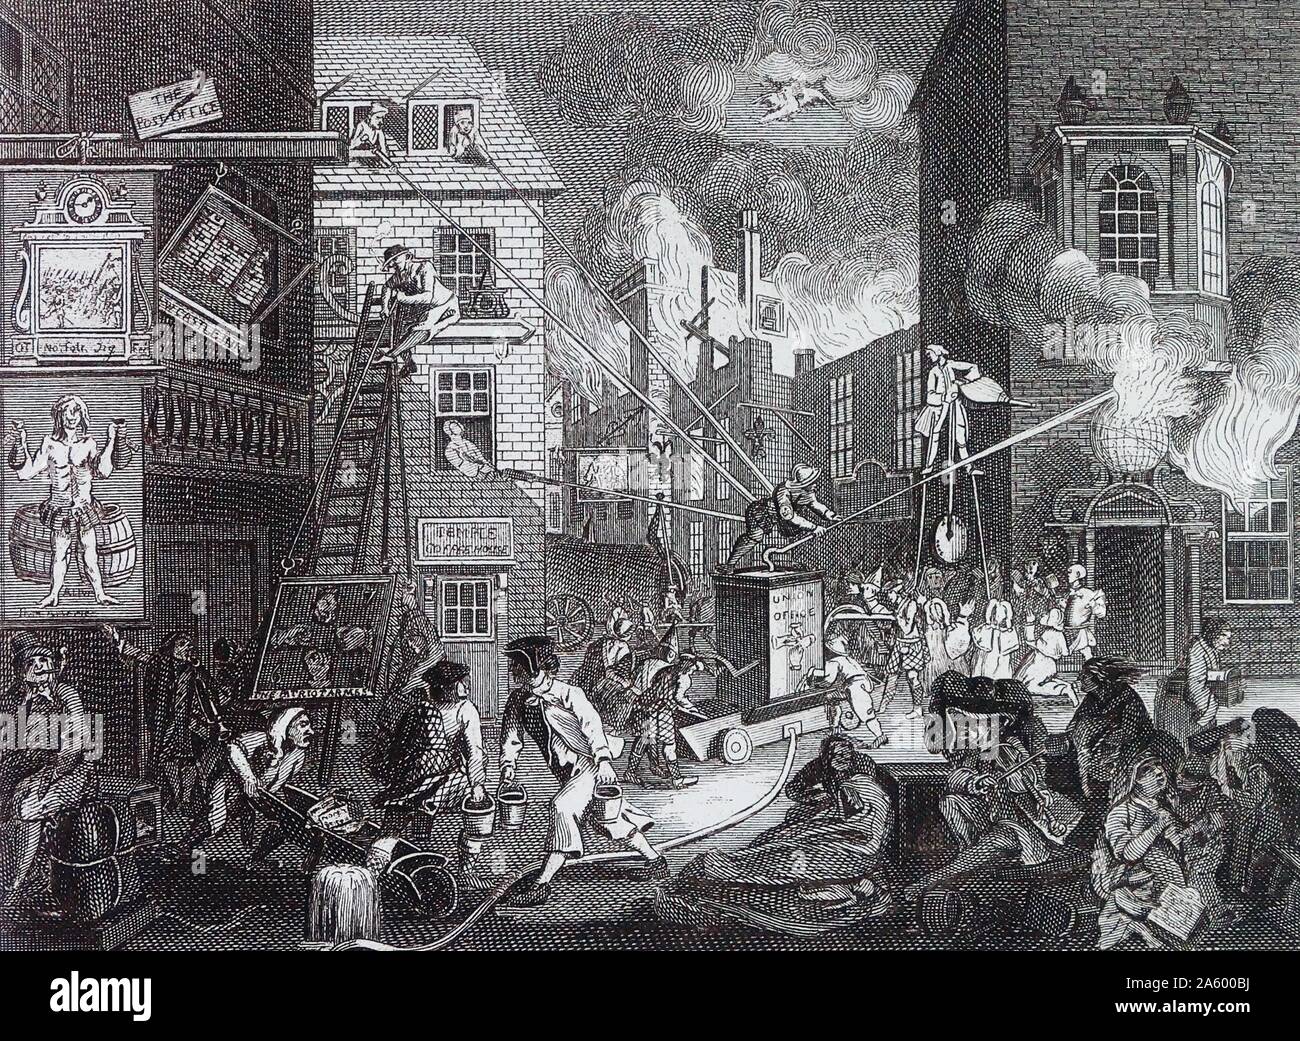 The Times. 1762, by William Hogarth (1697 – 1764). English painter, printmaker, pictorial satirist. The Times Hogarth took a decisive political, and at this time unpopular position: supporting the peace movement against the Seven Years' War (also called the French Indian War) spearheaded by King George III and his chief advisor, Lord Bute. Bute's opponent and leader of the Commons, William Pitt, supported the interests of the war and the economic profit derived from the colonial exploitations it permitted. Stock Photo